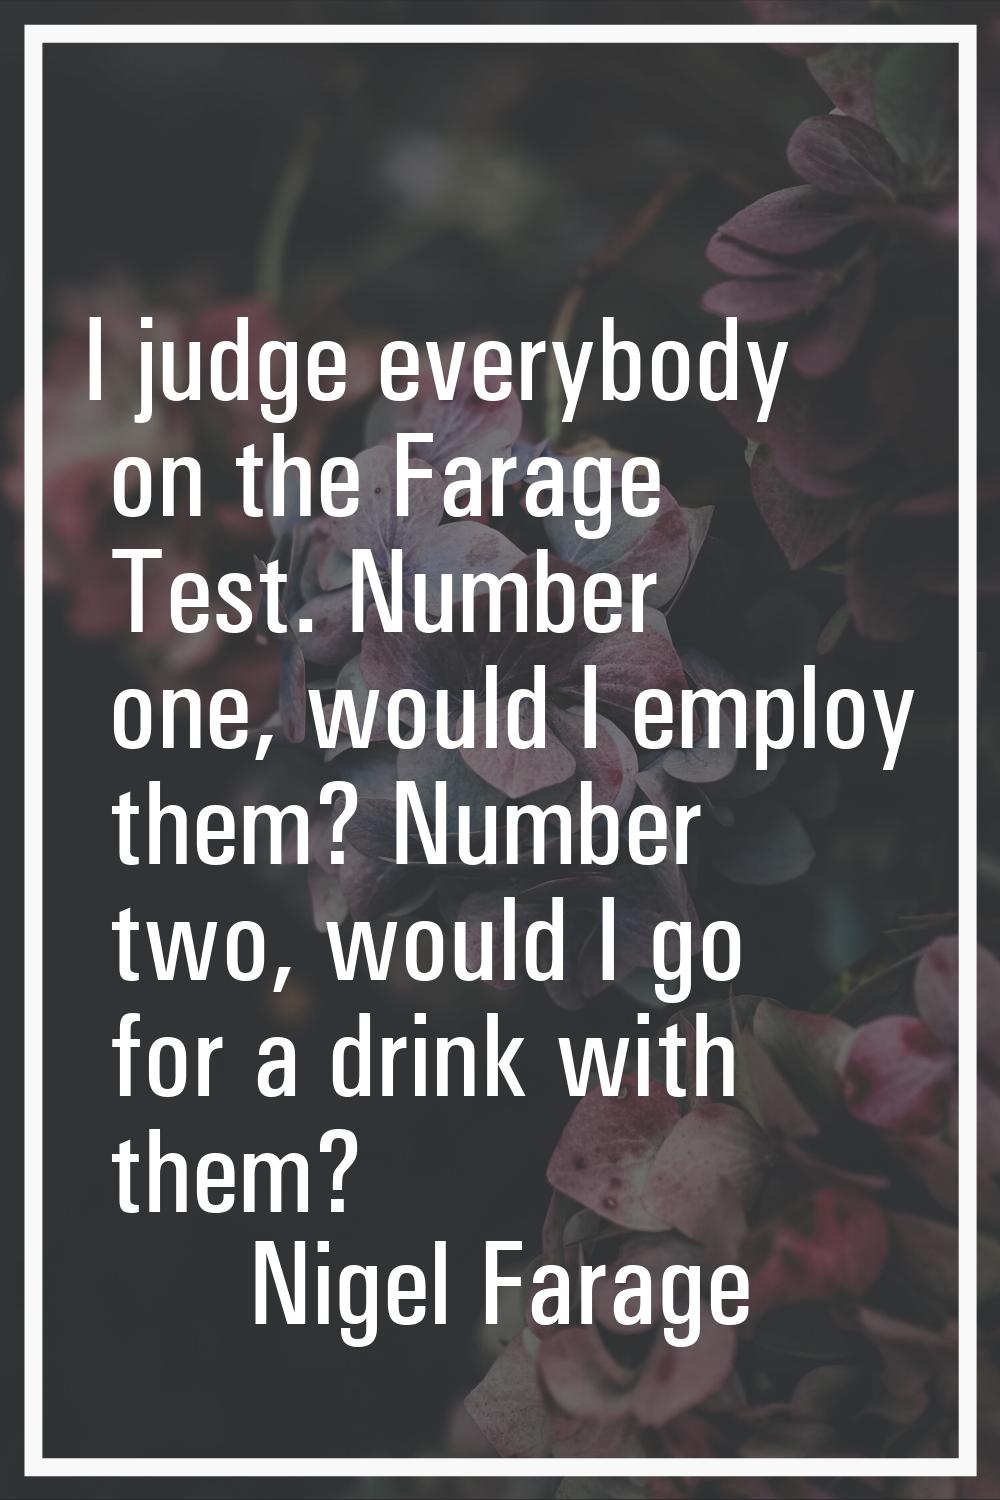 I judge everybody on the Farage Test. Number one, would I employ them? Number two, would I go for a